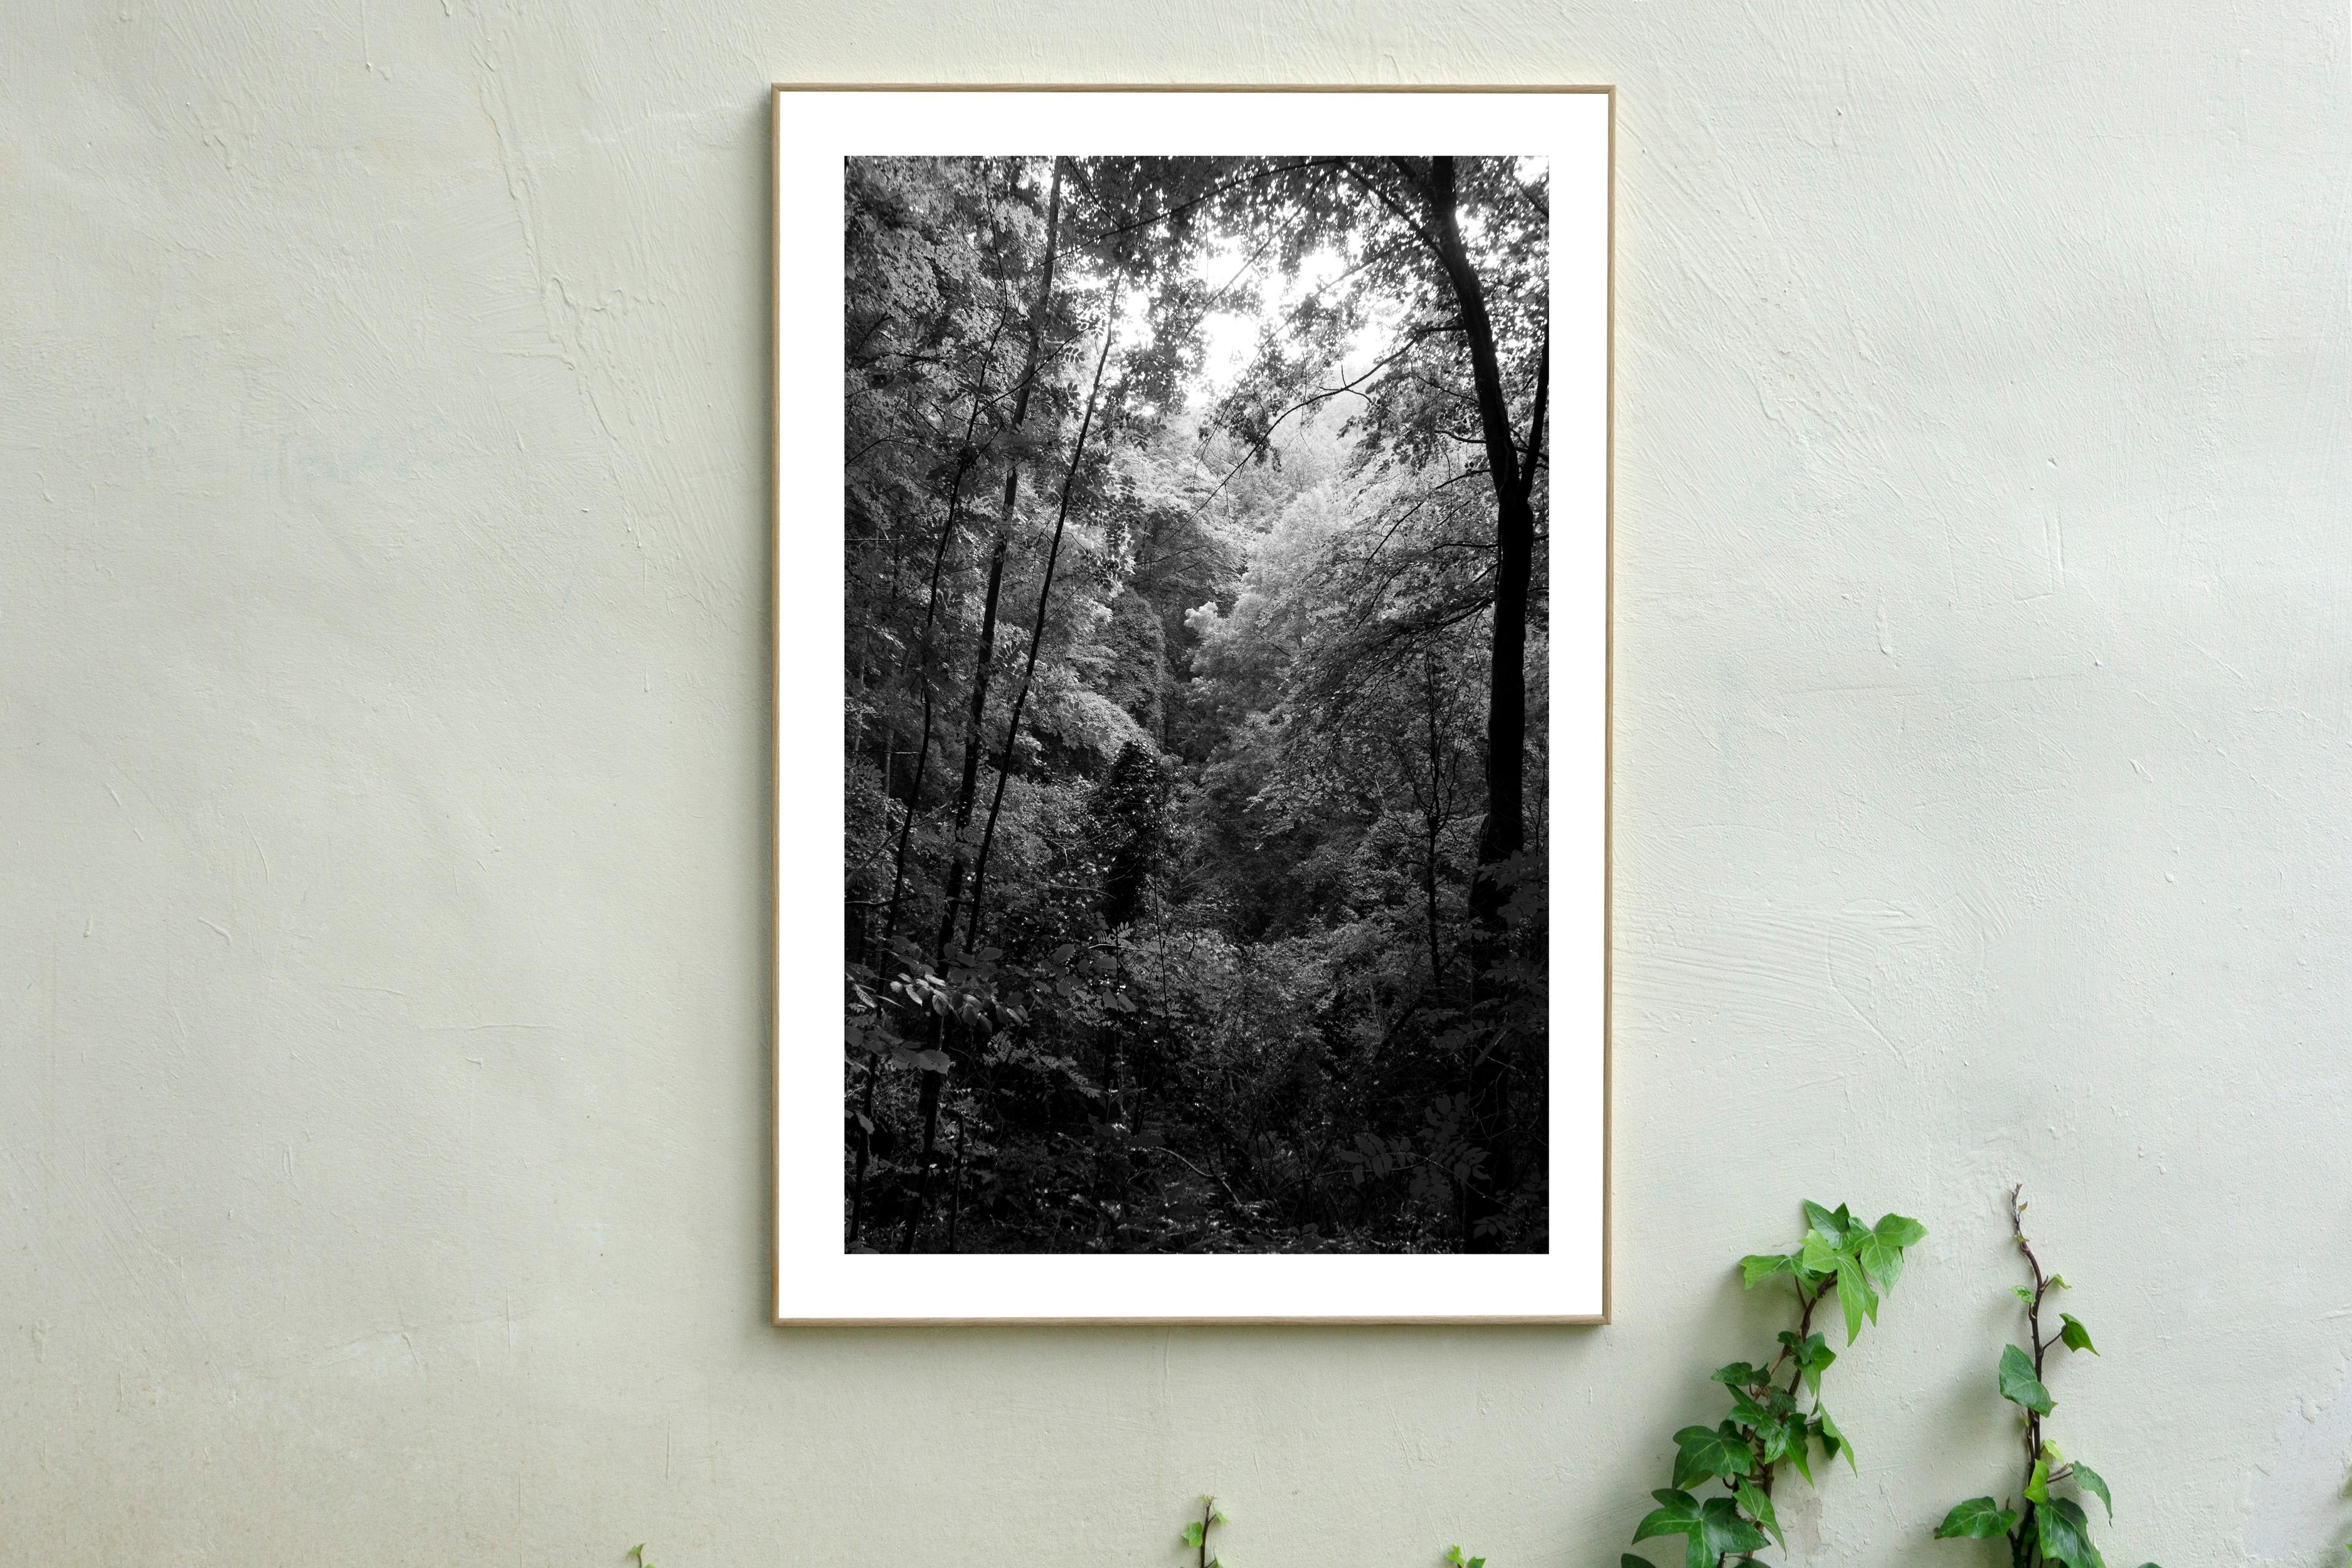 This is an exclusive limited edition black and white Giclée print, on 100% cotton Hahnemühle Photo Rag Fine Art matte paper. 

This beautiful black and white high contrast photograph is titled 